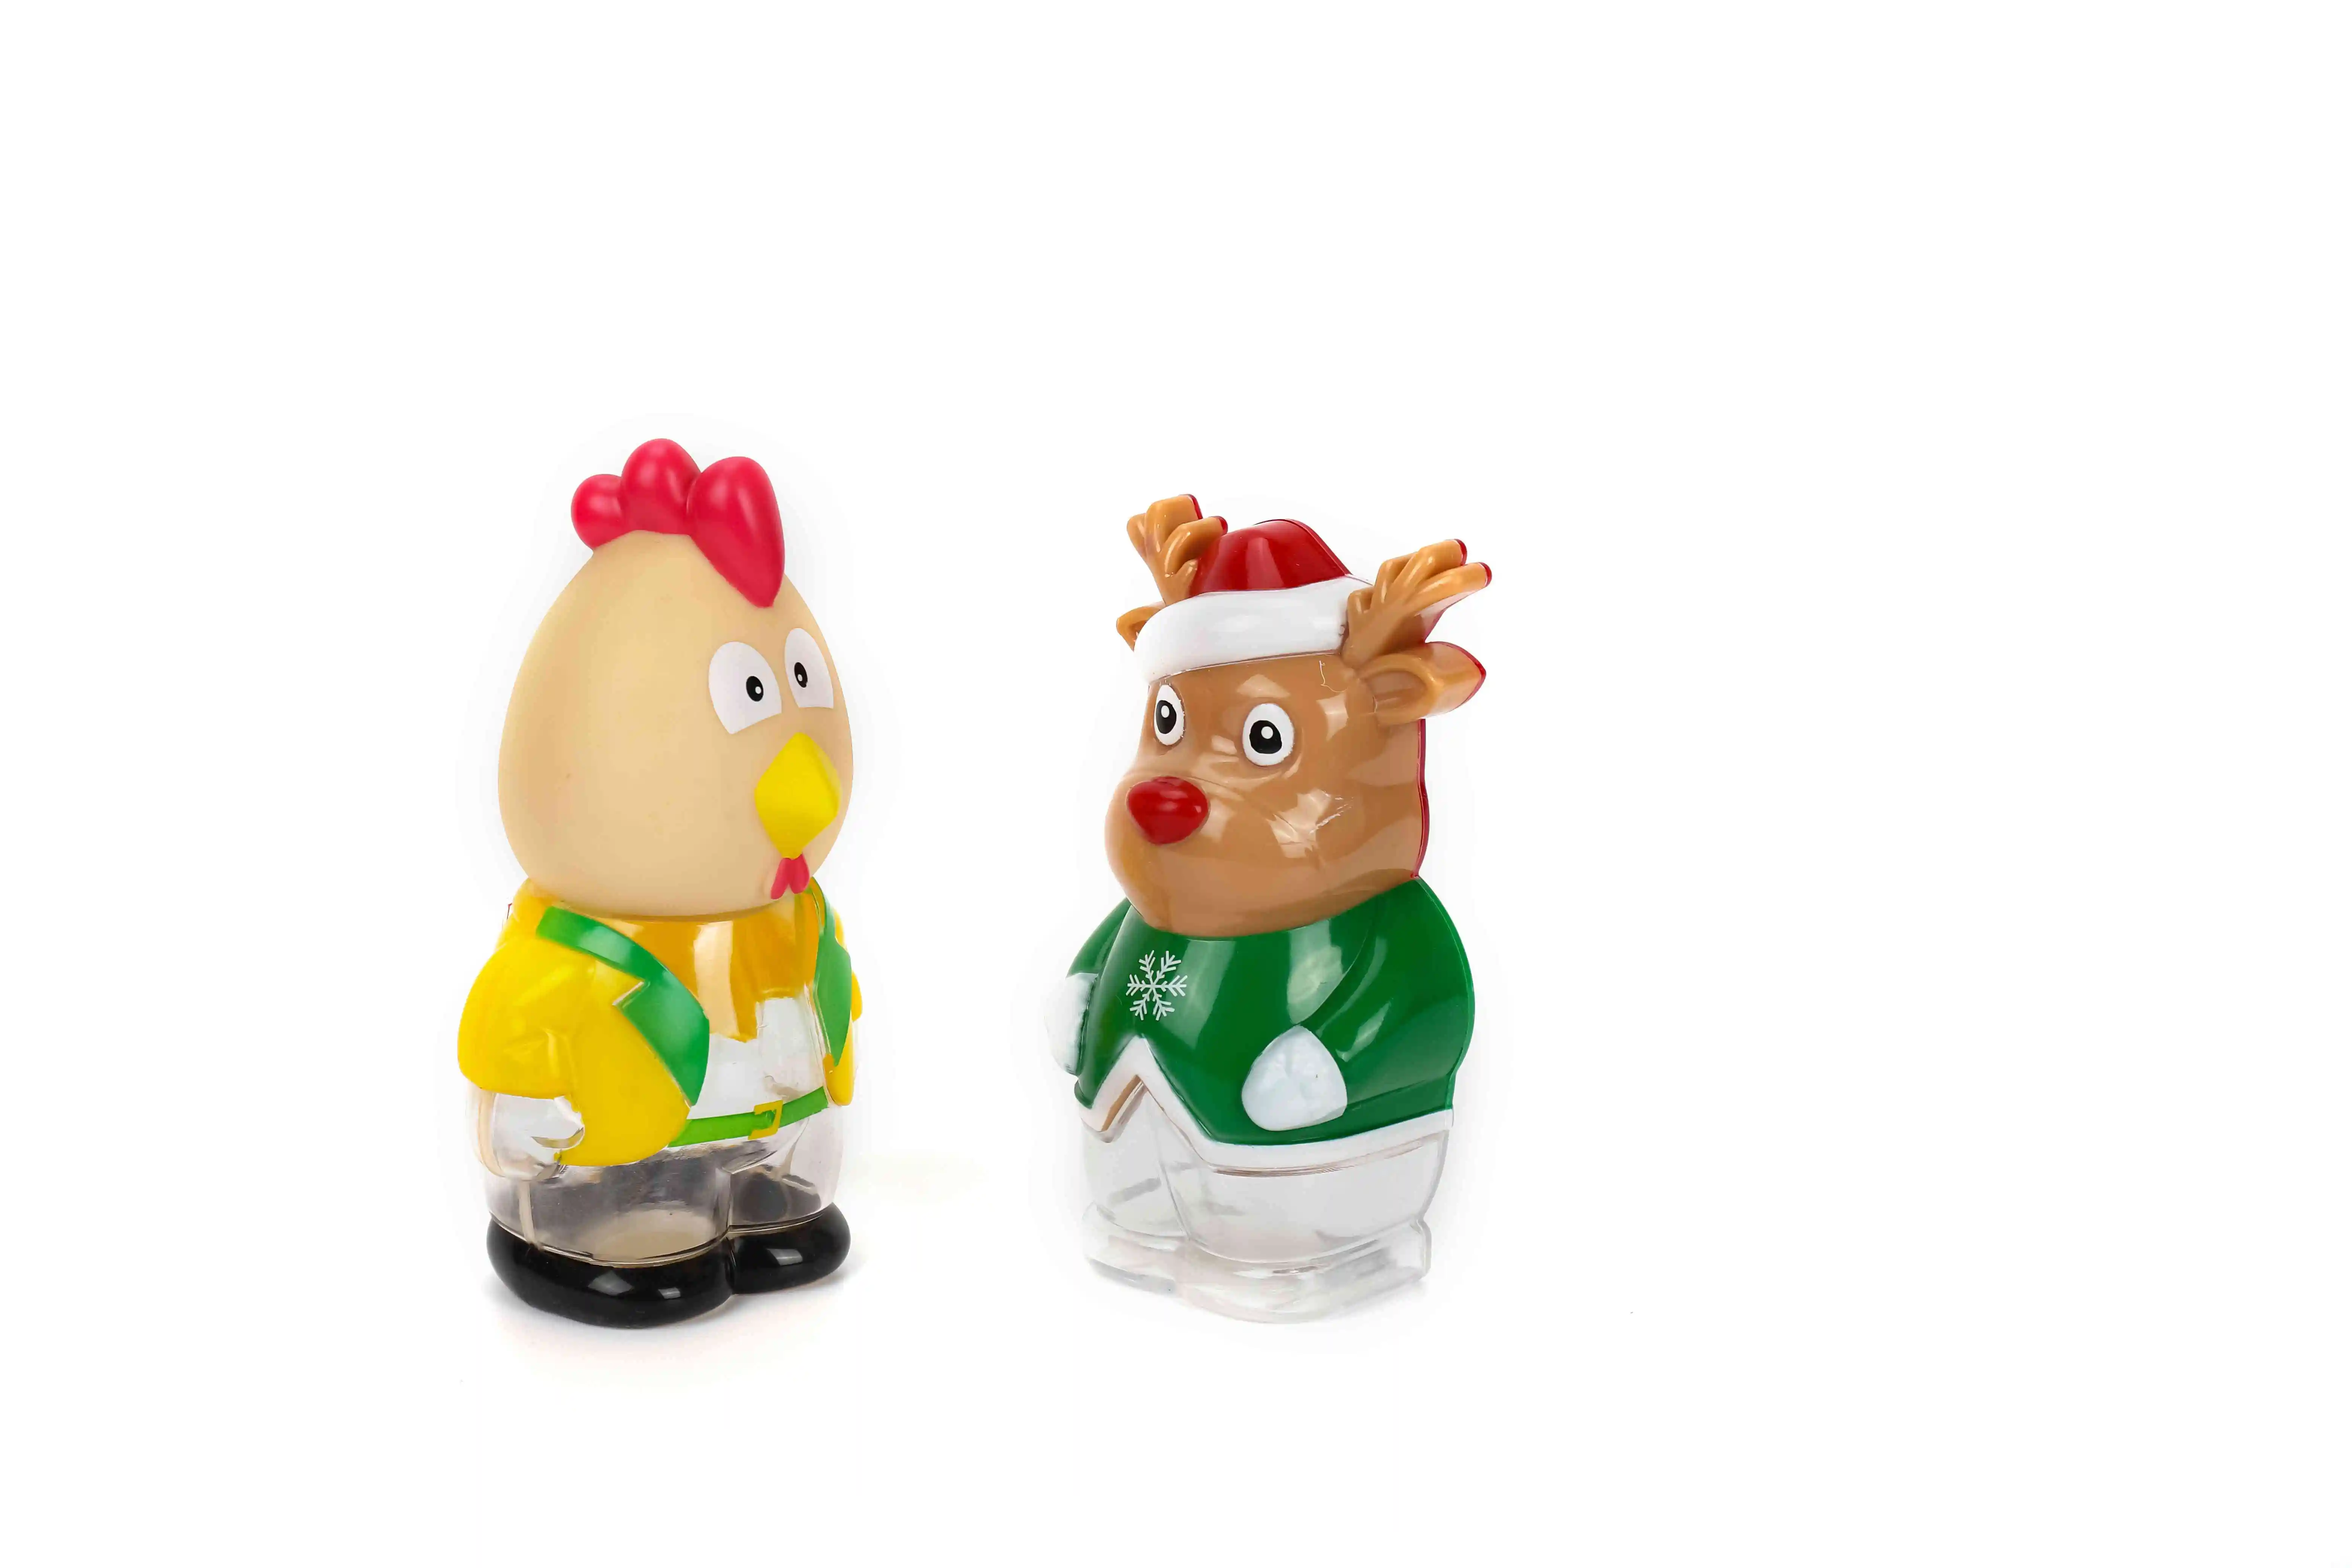 Cute Cartoon Chicken Candy Box Plastic Craft Pvc Christmas Party Craft Ornaments Accessory Children Toy Gift